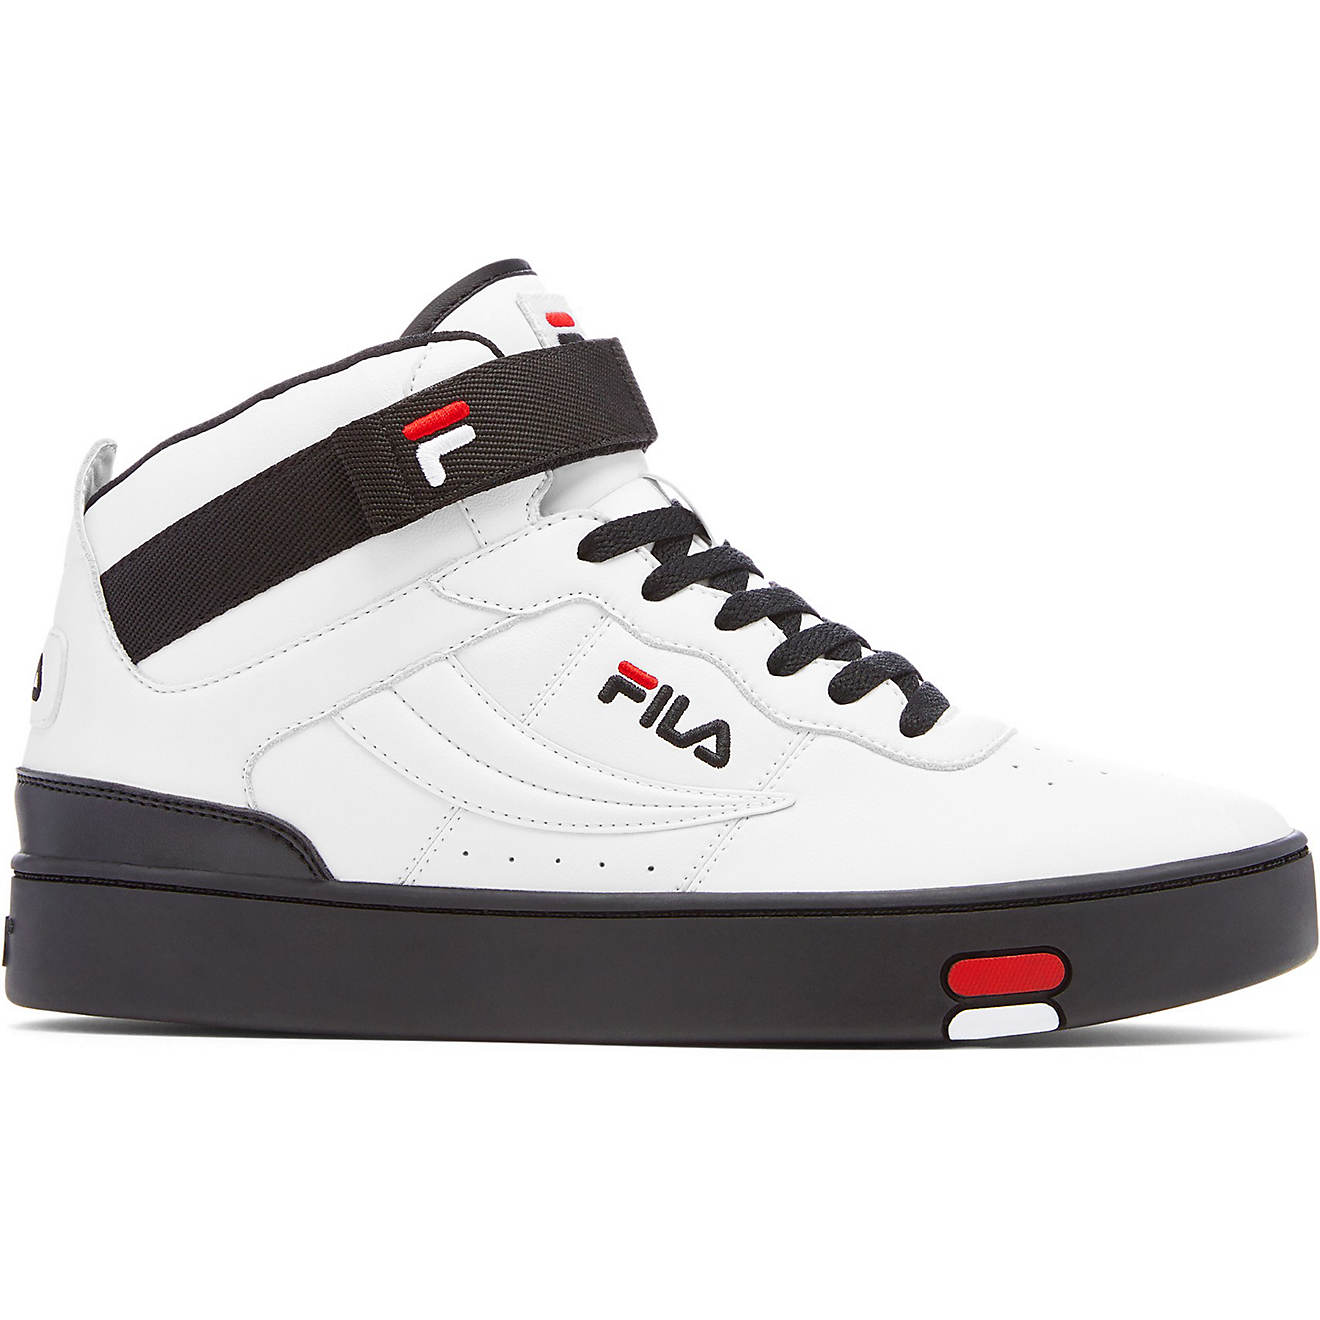 FILA Men's V-10 LUX Shoes | Free Shipping at Academy